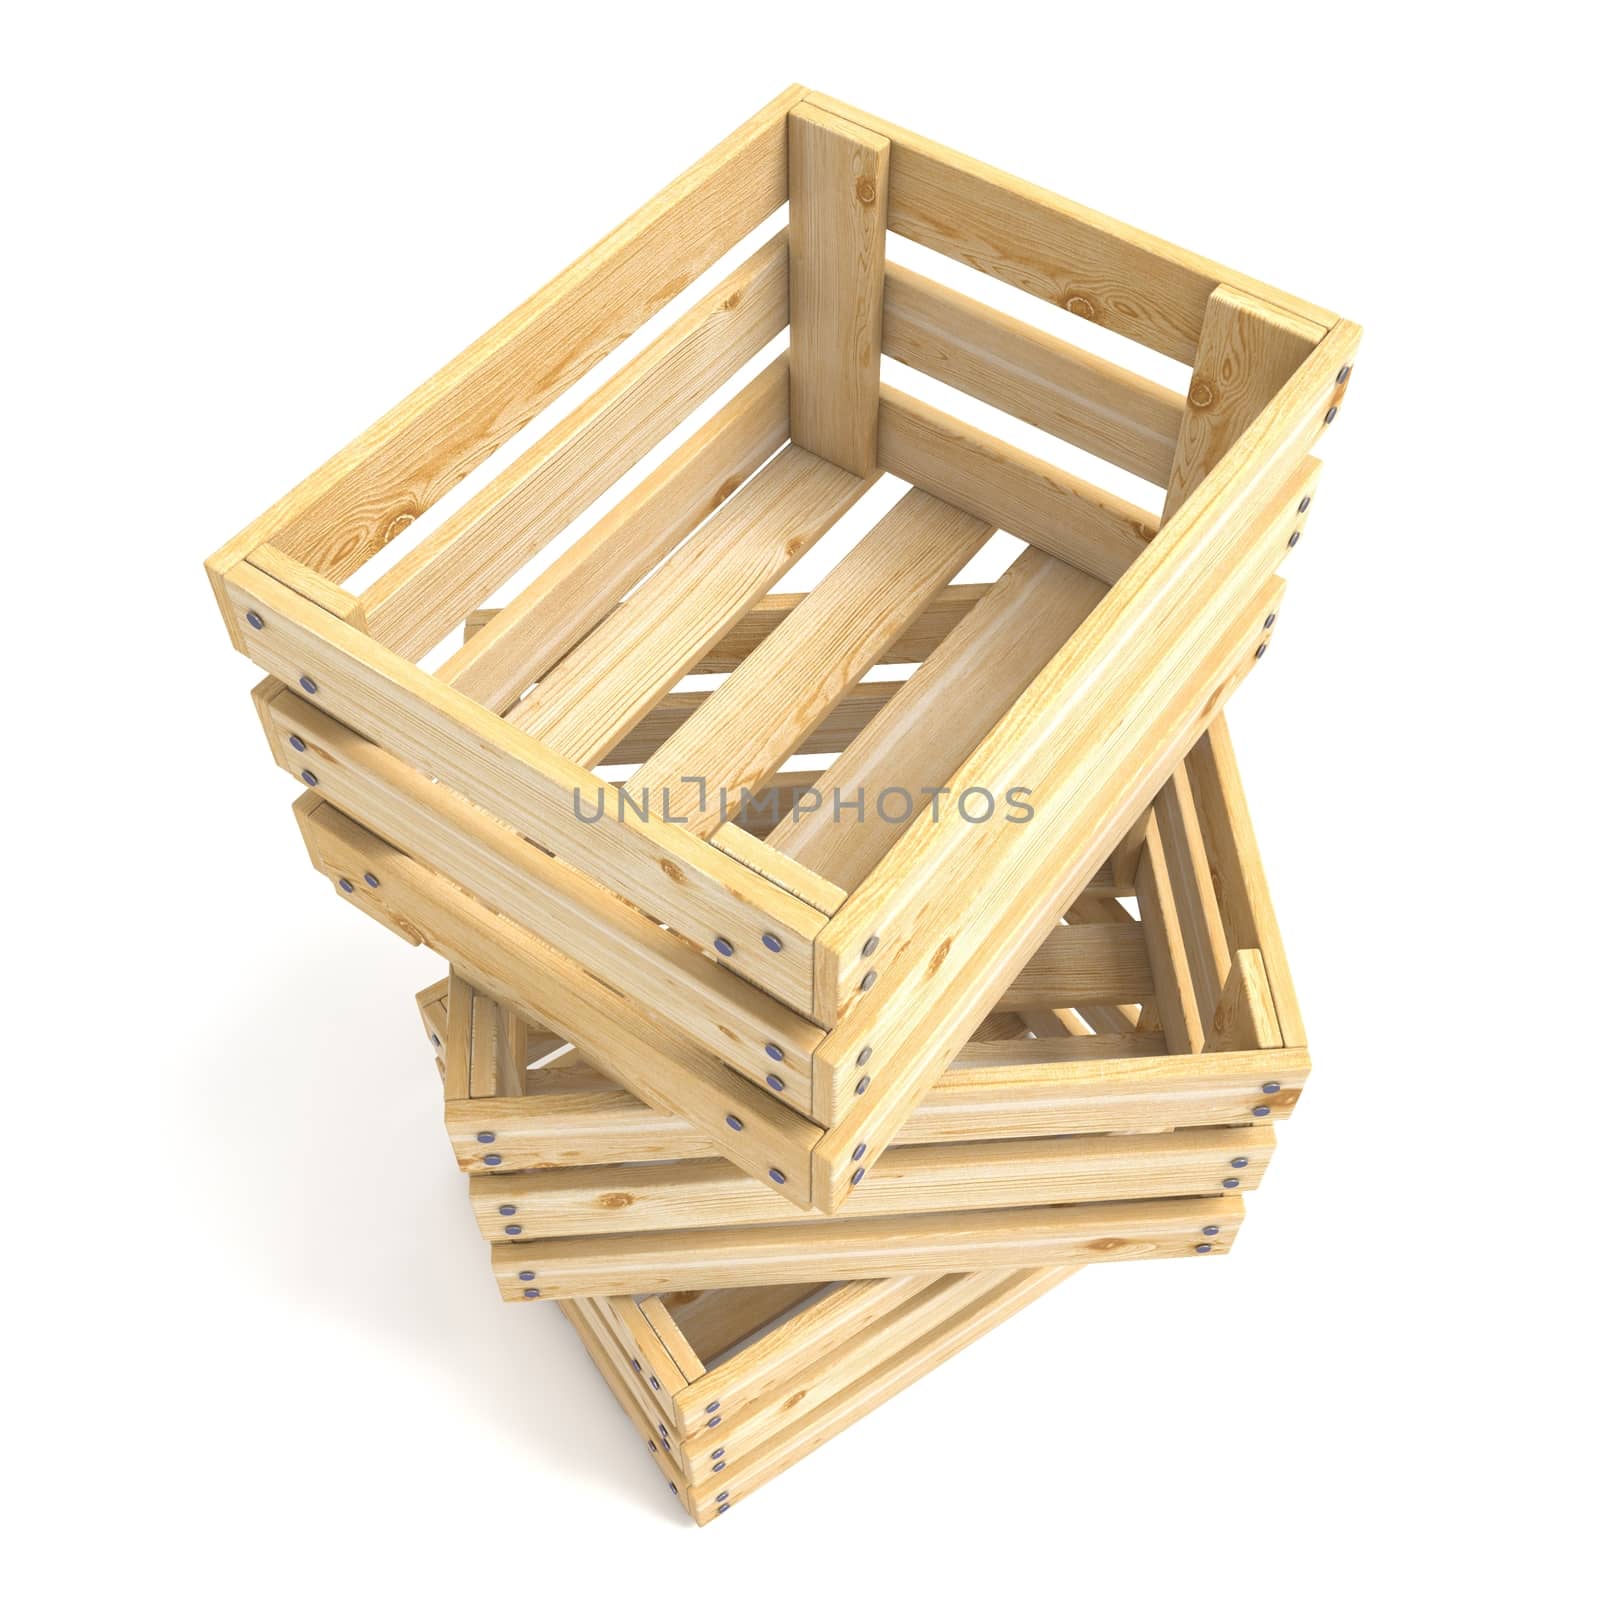 Three empty wooden crate. 3D render illustration isolated on white background